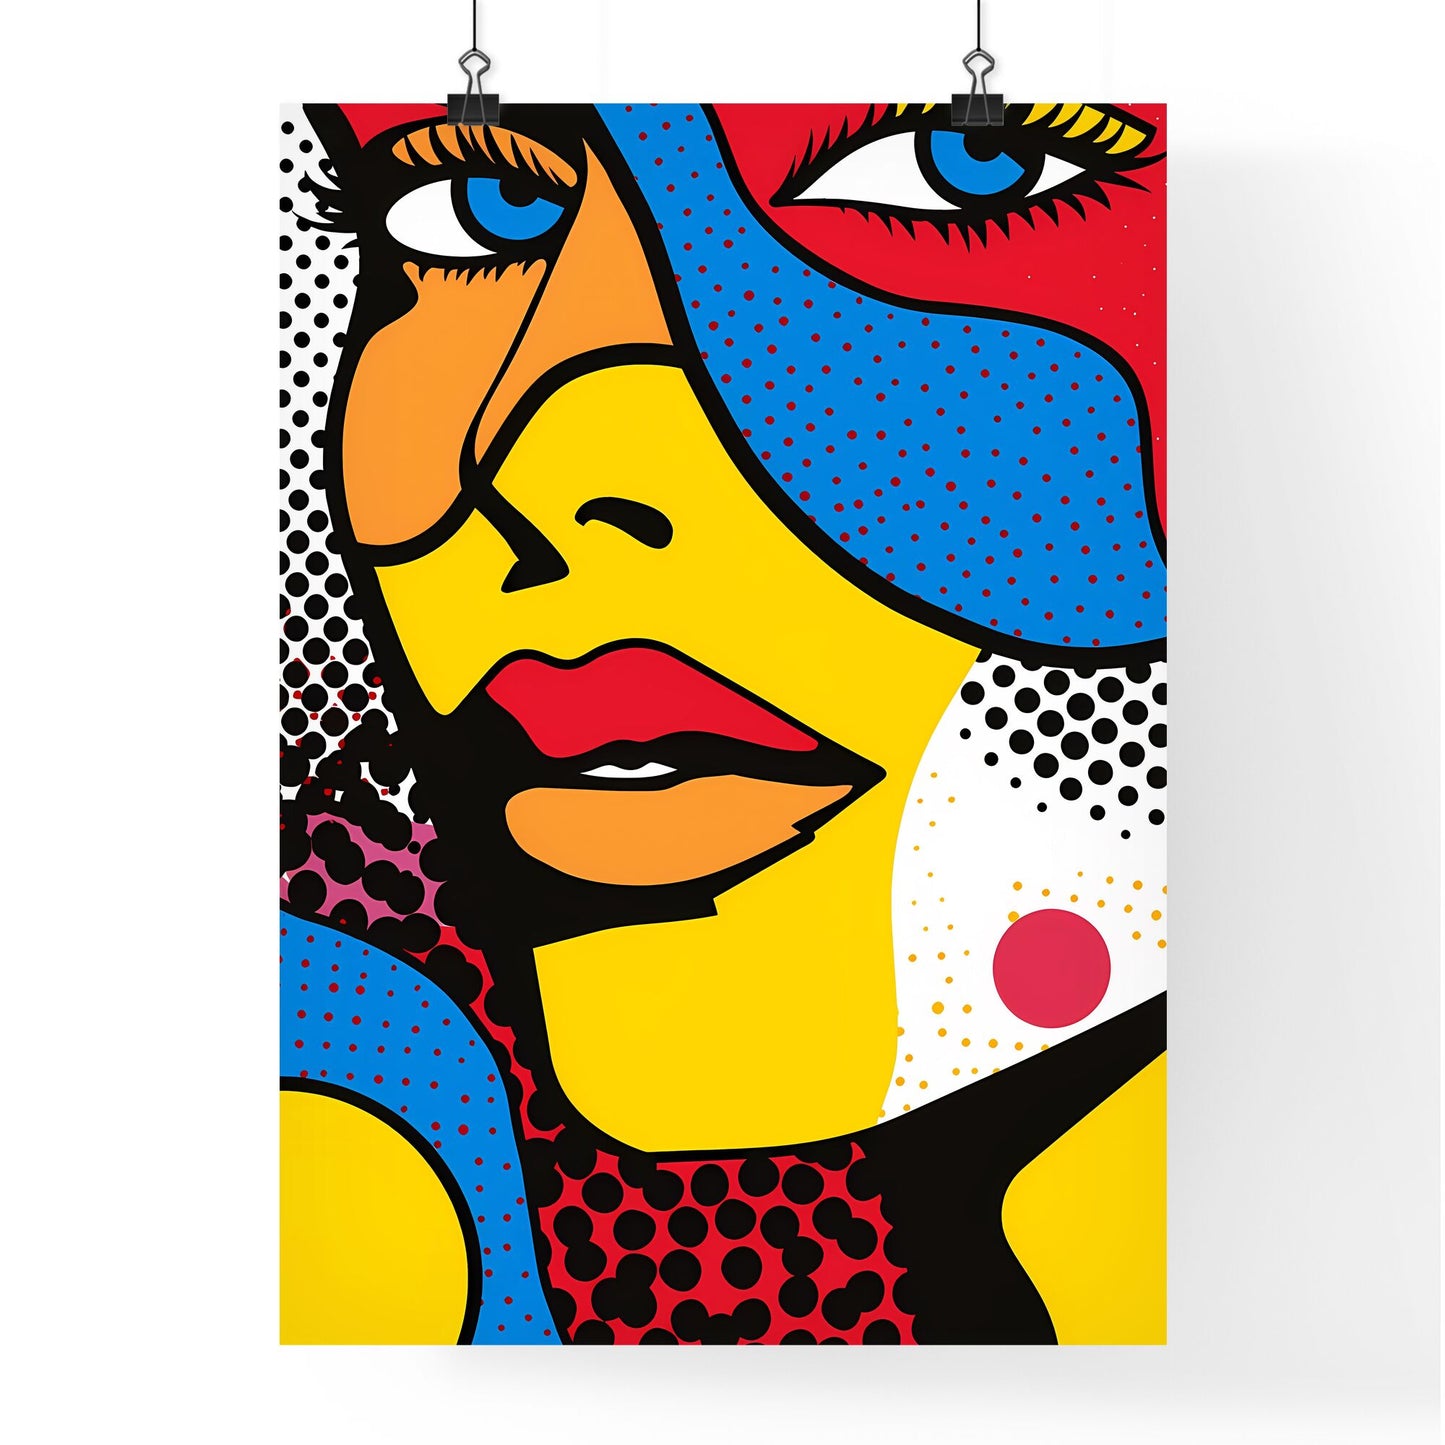 Playful Pop Art Woman: Bold, Graphic, Energetic, Lively, Vibrant, Expressive, Contemporary, Youthful, Minimalist Default Title